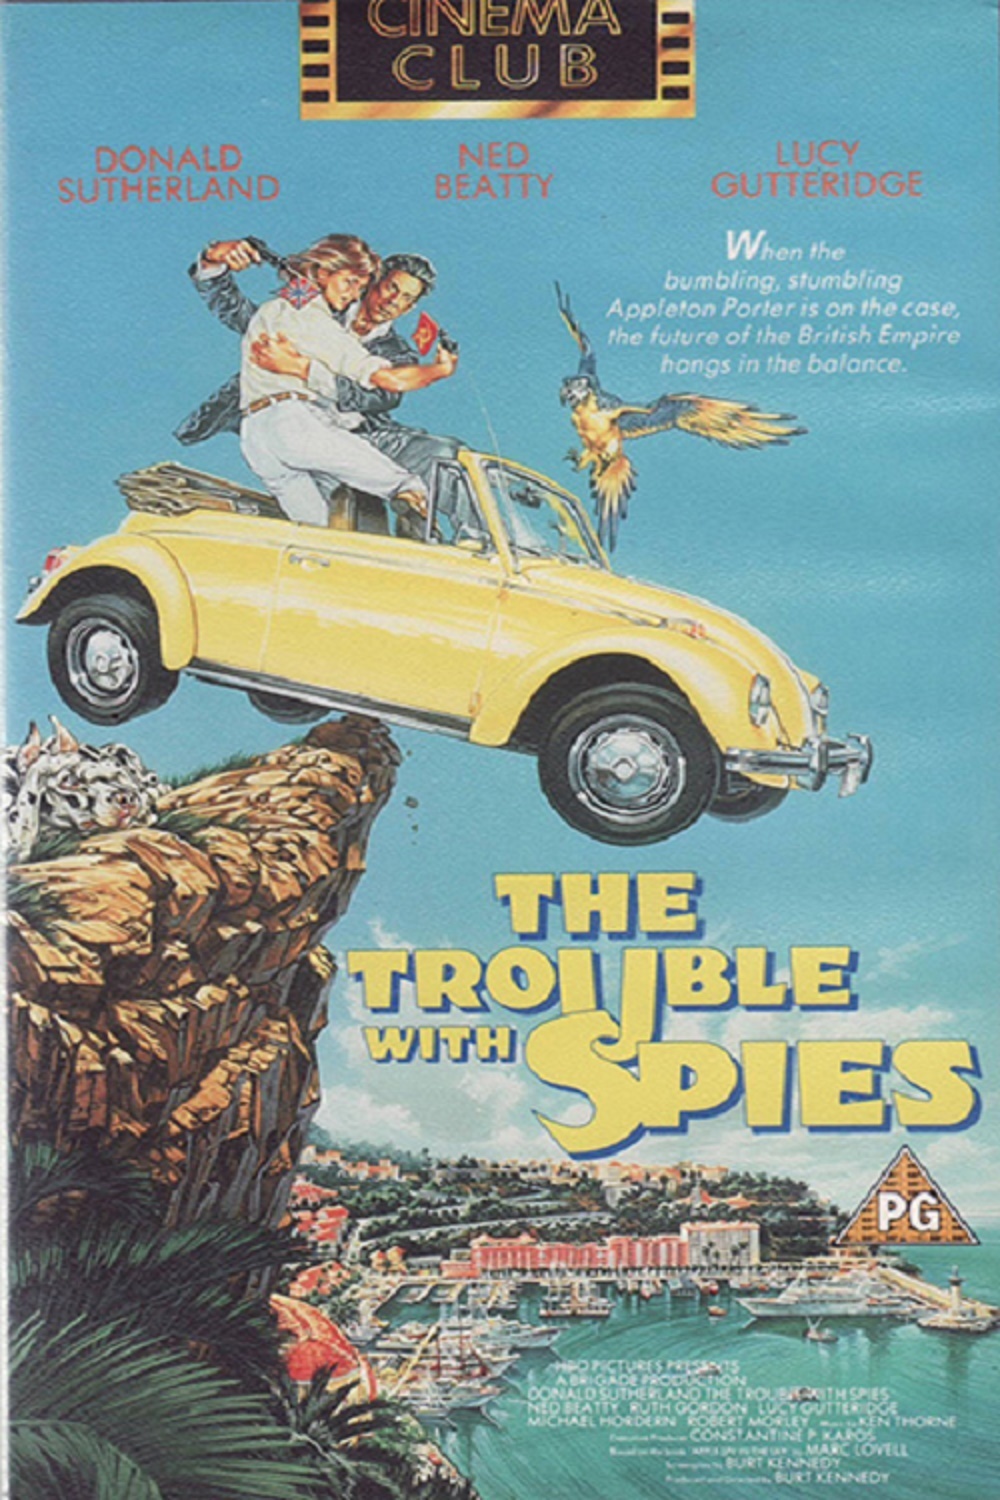 The Trouble with Spies (1987) starring Donald Sutherland on DVD on DVD